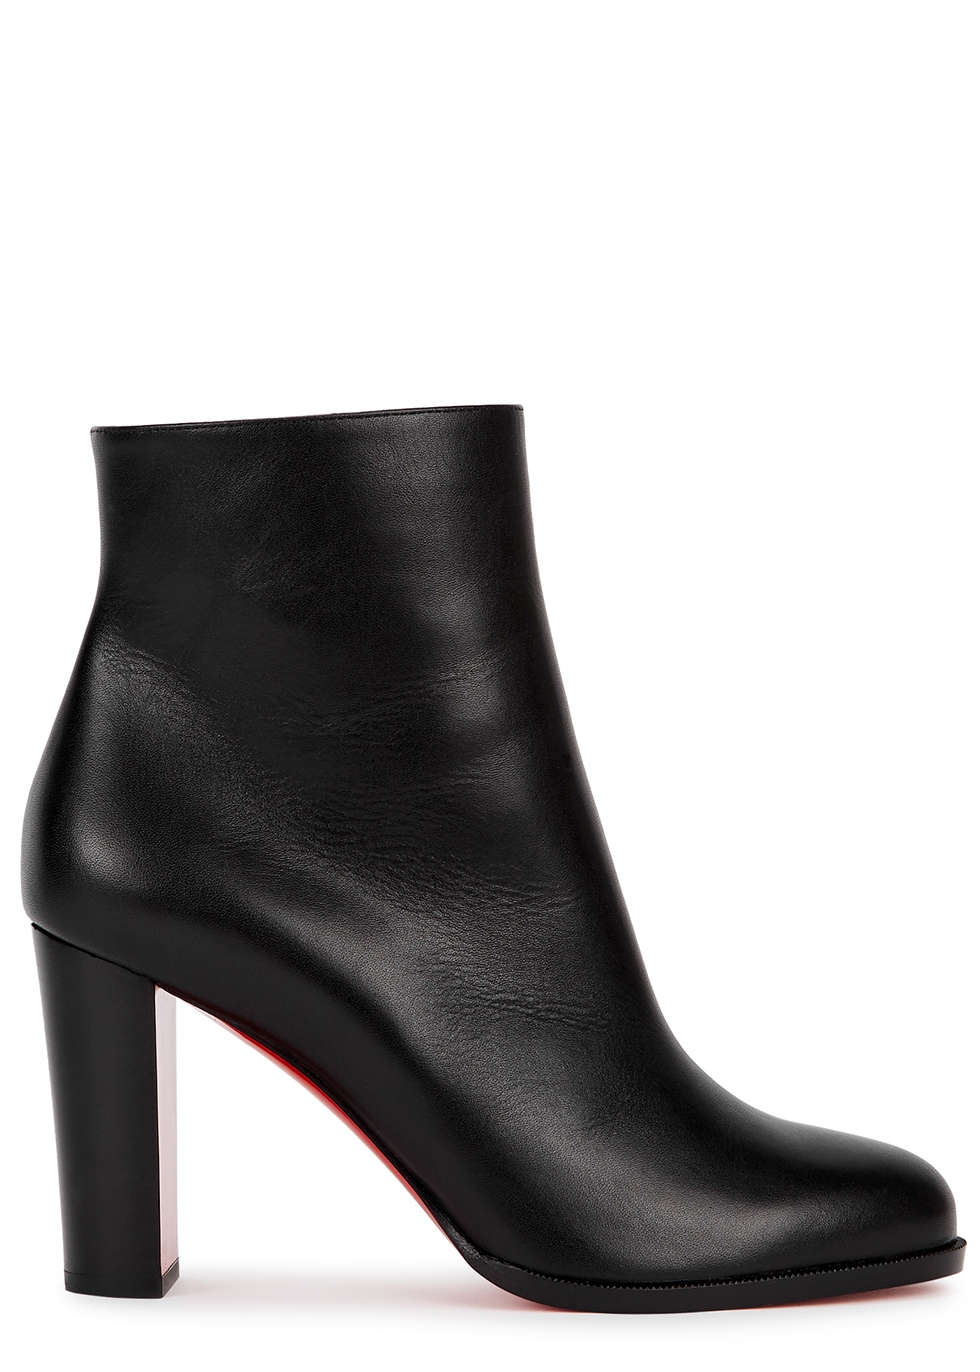 Christian Louboutin Adox 85 black leather ankle boots - Harvey Nichols